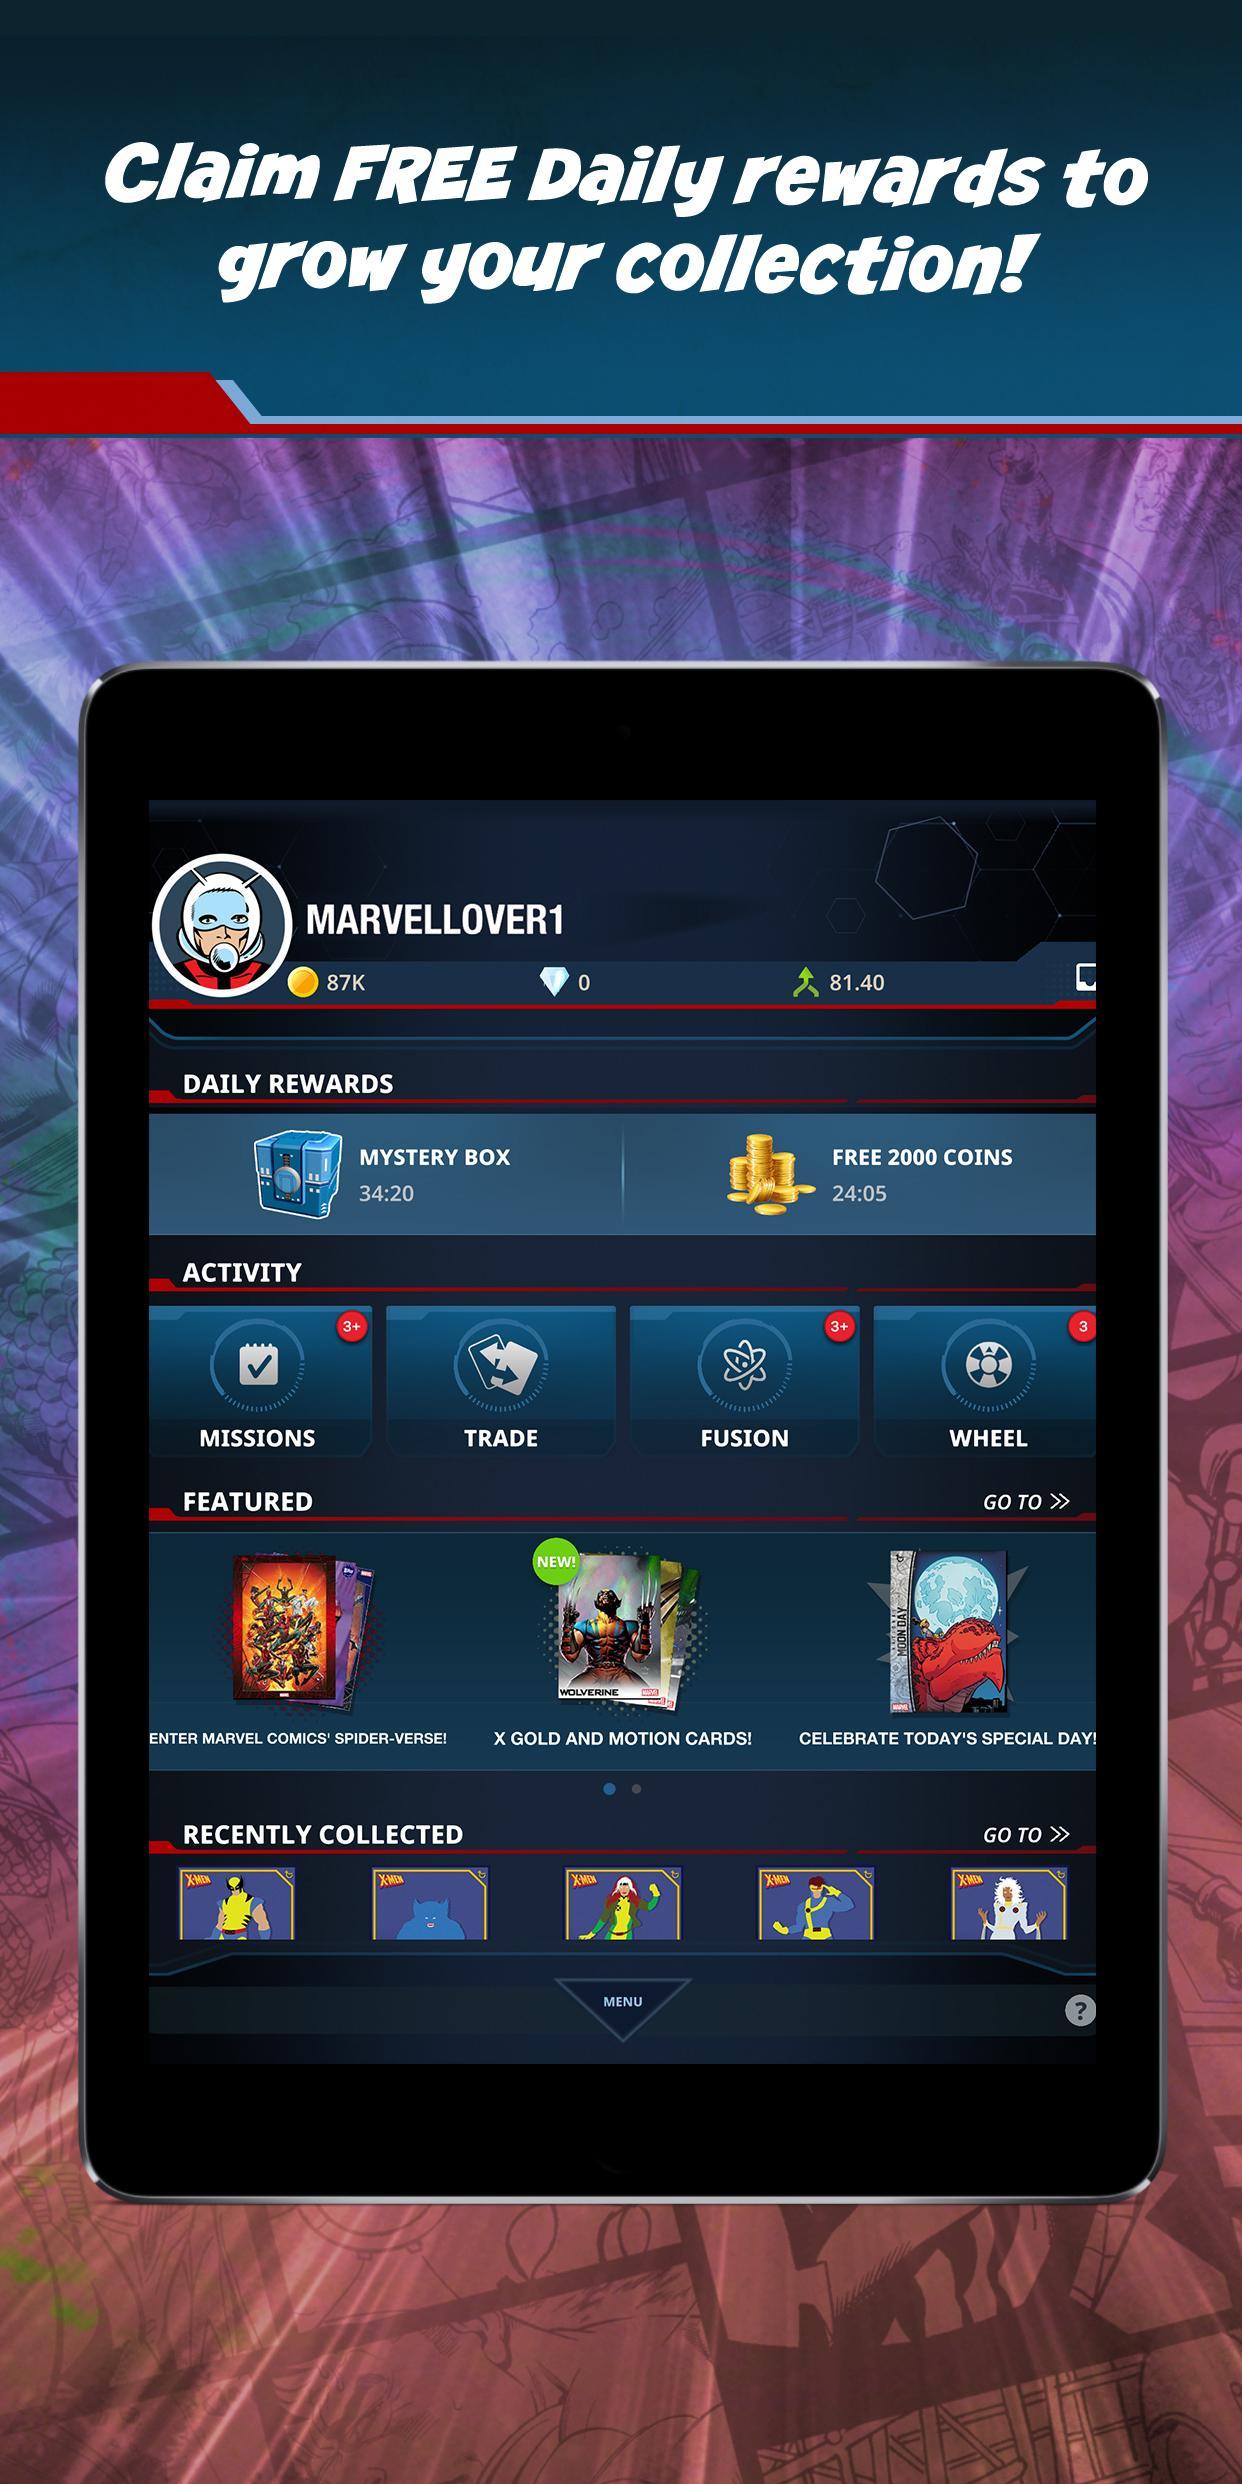 Marvel Collect! by Topps Card Trader 14.0.0 Screenshot 14